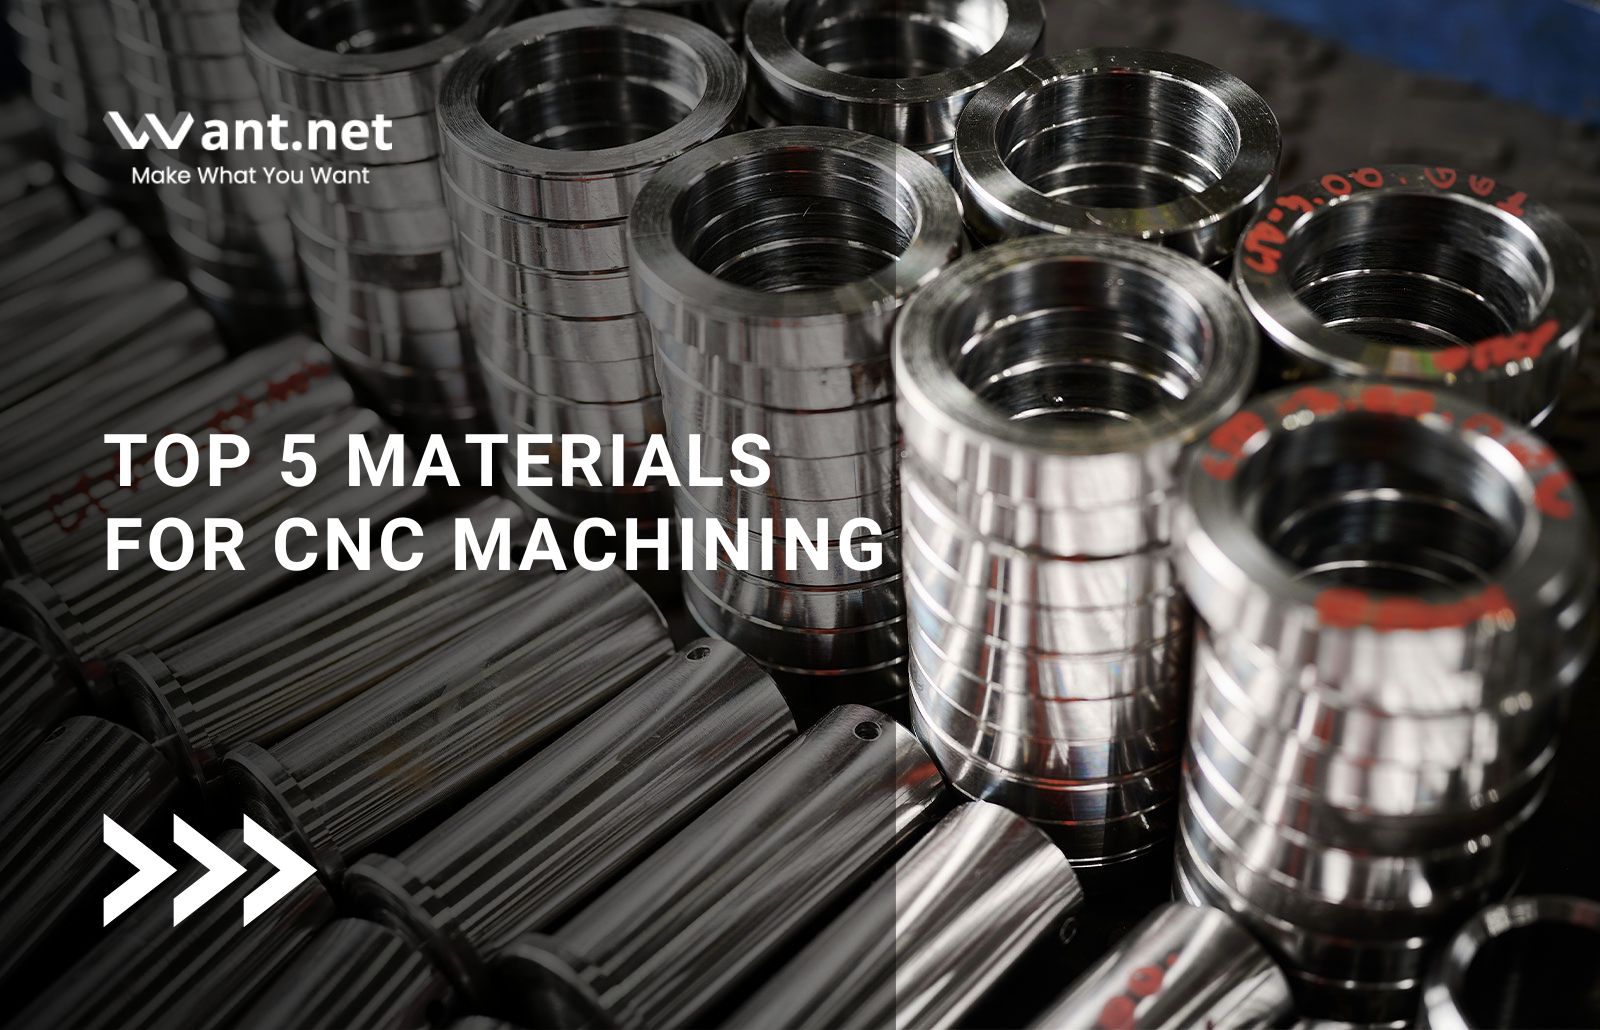 Top 5 Materials for CNC Machining